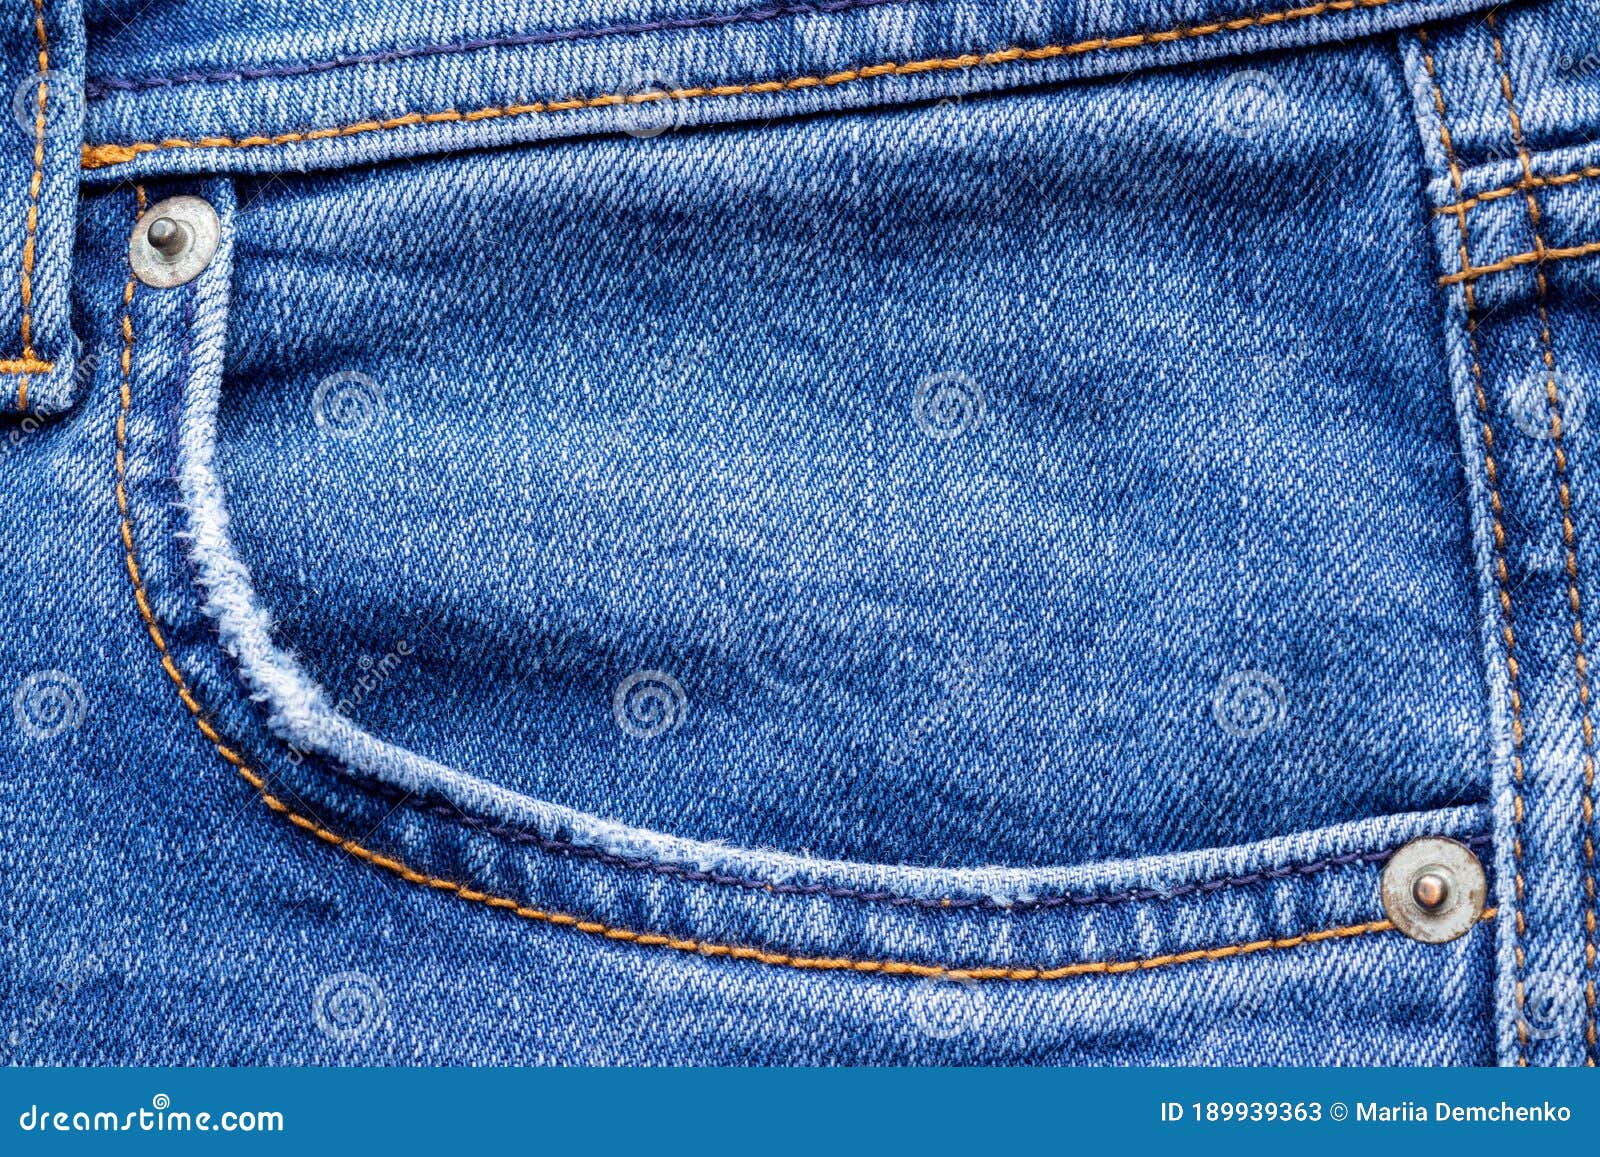 Jeans Front with Pocket. Bright Blue Denim Fabric Texture Background ...